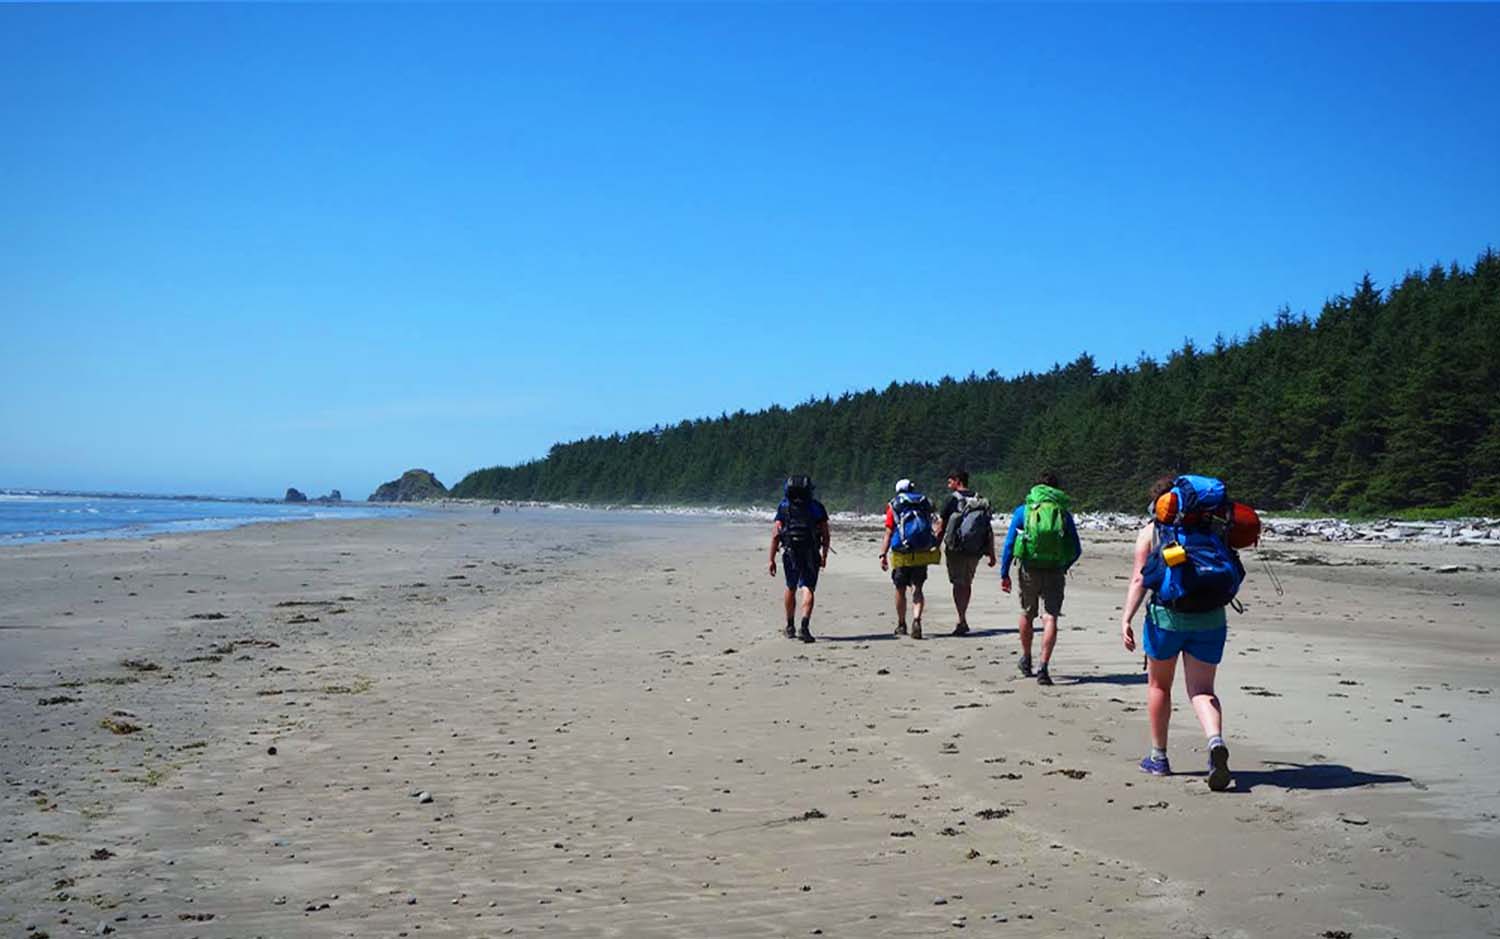 A group of backpackers walking on the beach